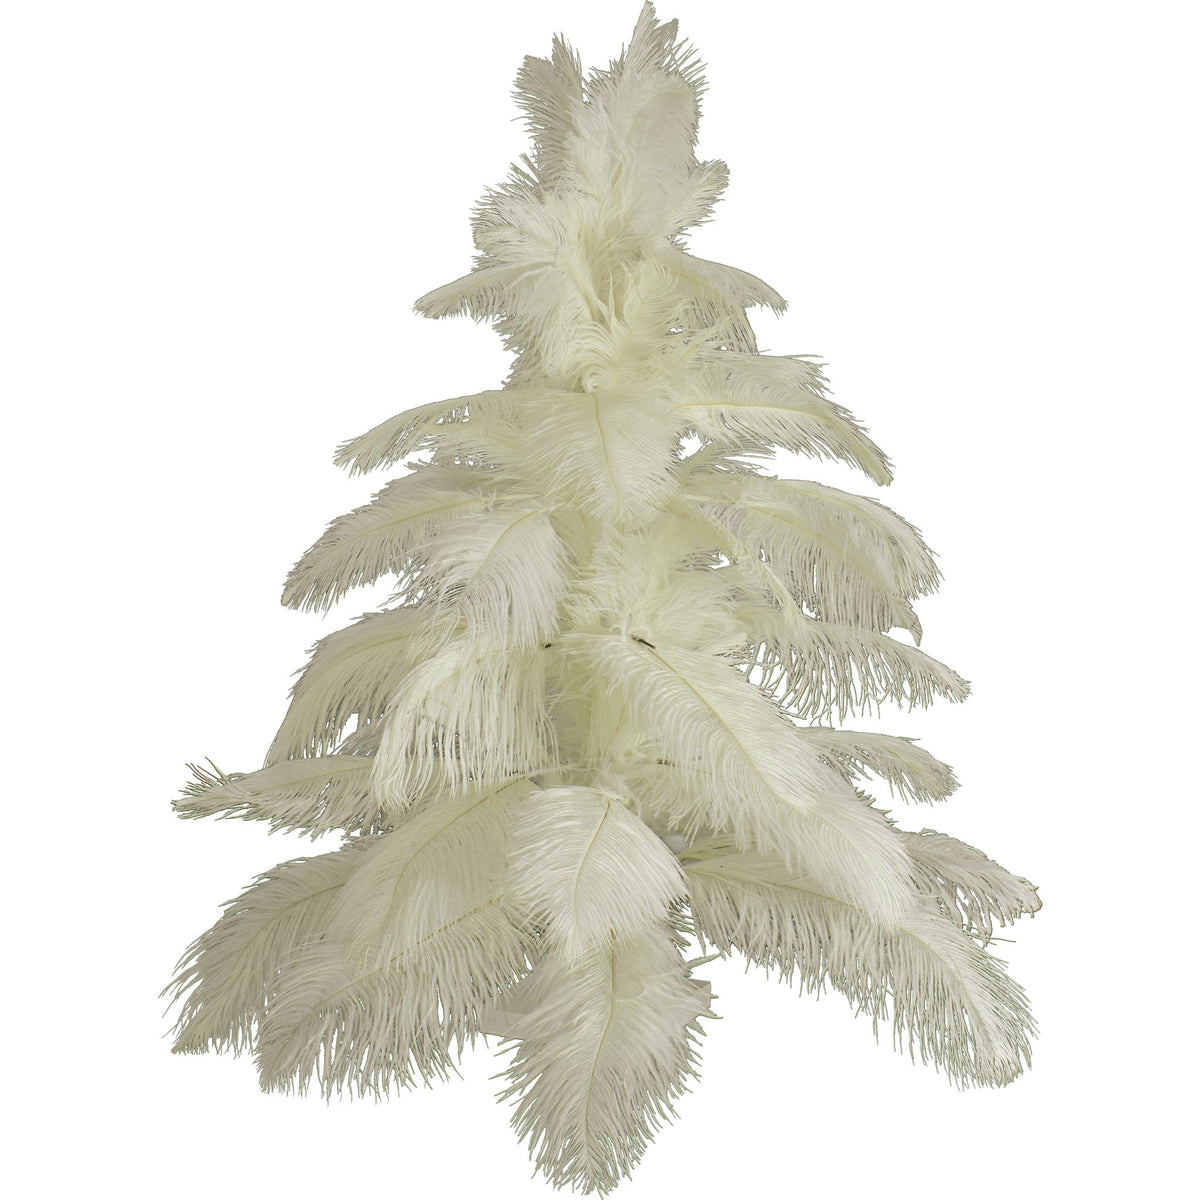 Introducing Lee Display's brand new 2FT Tall White Ostrich Feather Christmas Trees! Made with real ostrich feathers